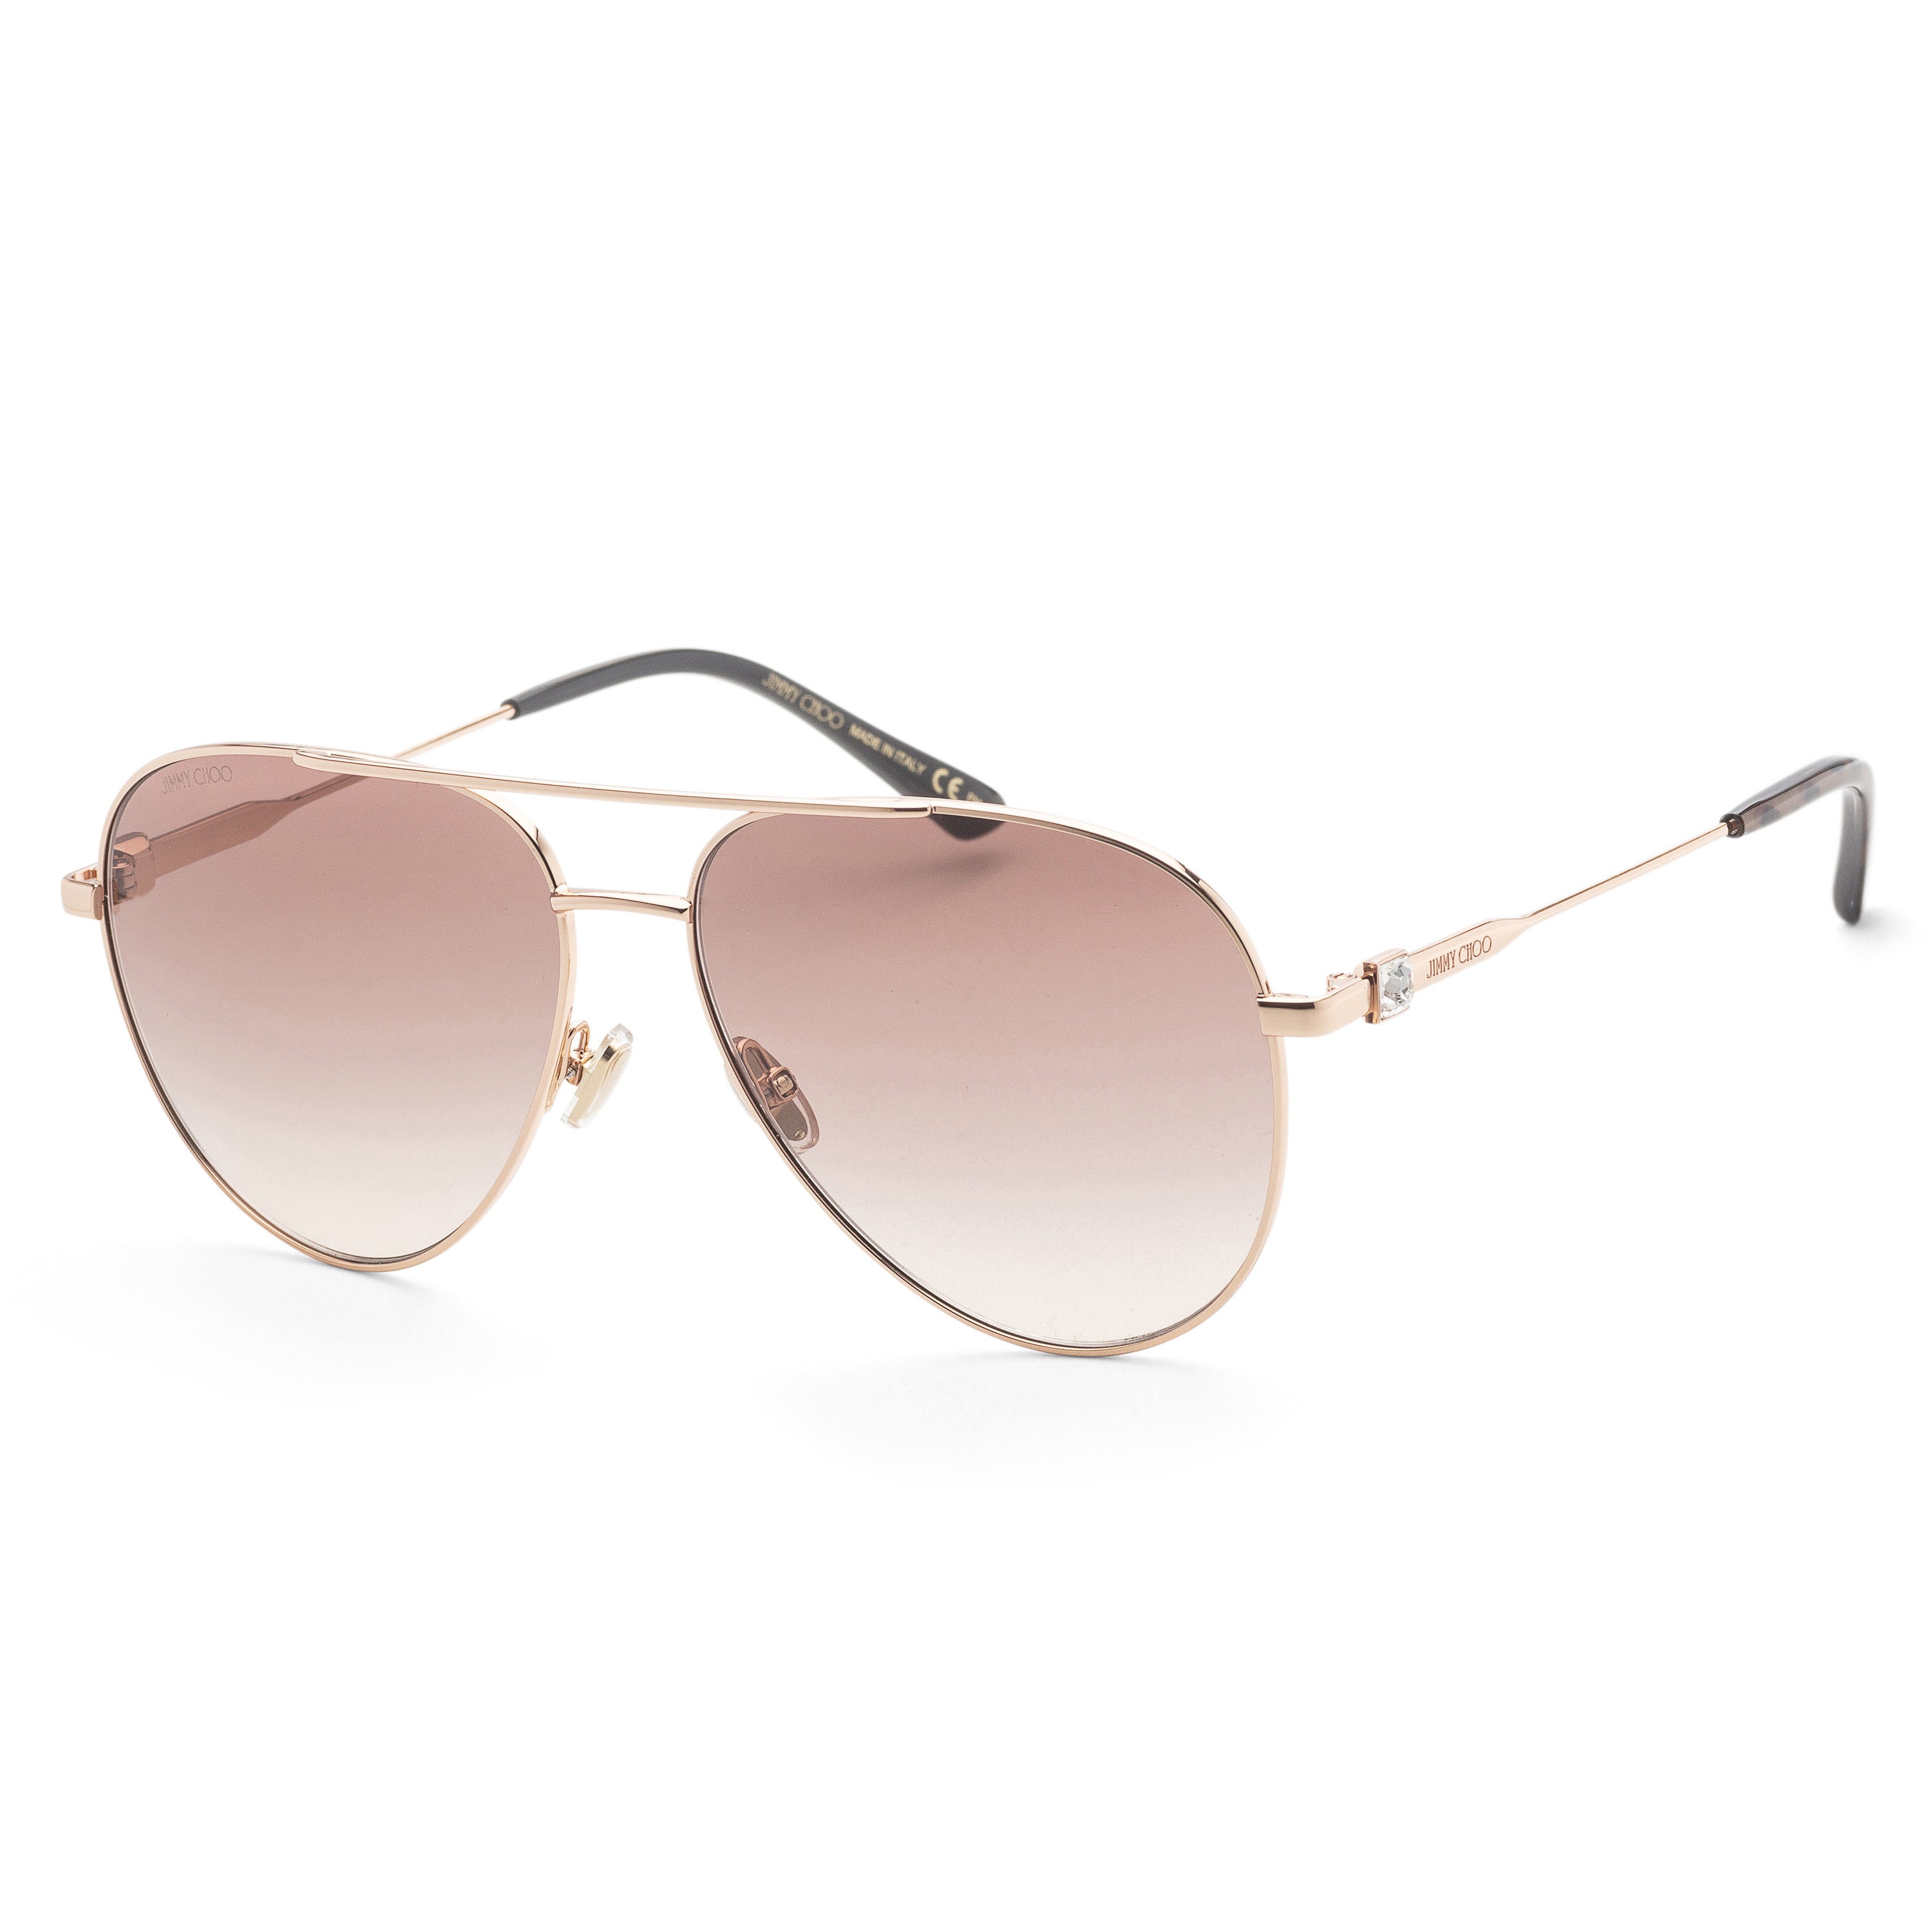 title:Jimmy Choo Women's OLLYS-0DDB-HA Olly 60mm Gold Copper Sunglasses;color:Gold Copper